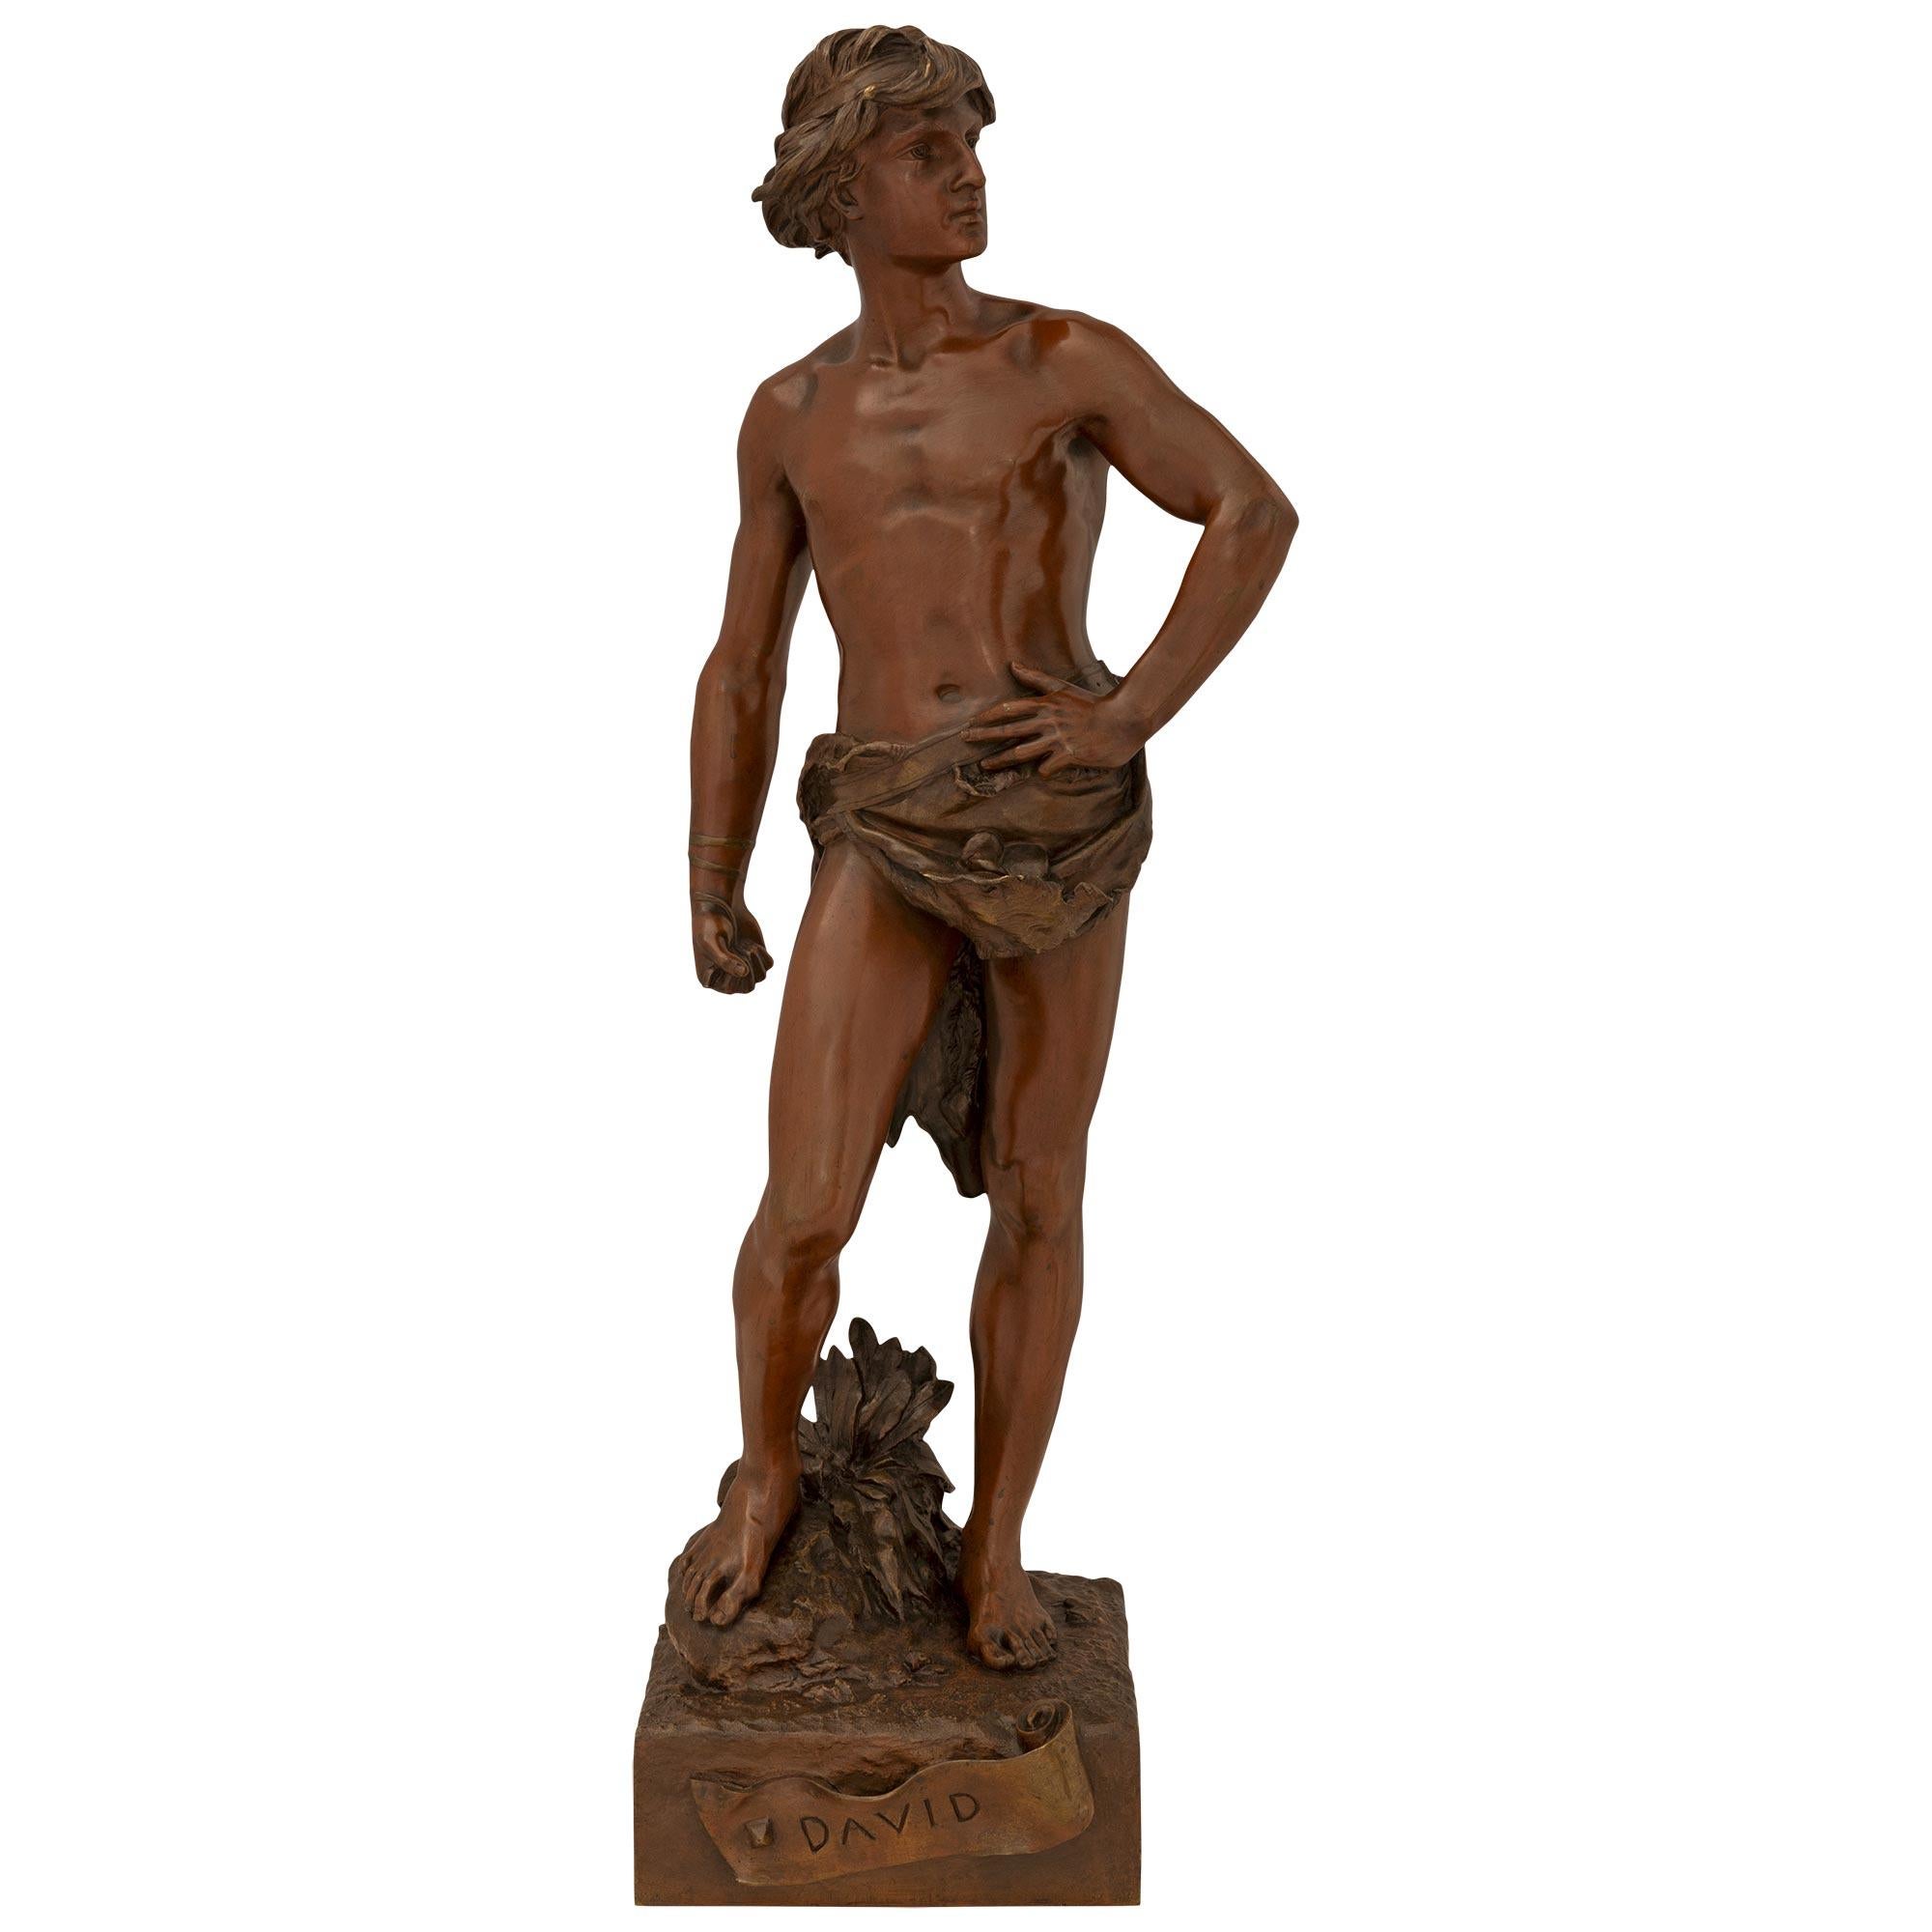 A handsome French 19th century Patinated bronze statue of a young David signed A Gaudez. The statue is raised on a square base displaying a front scroll with the name 